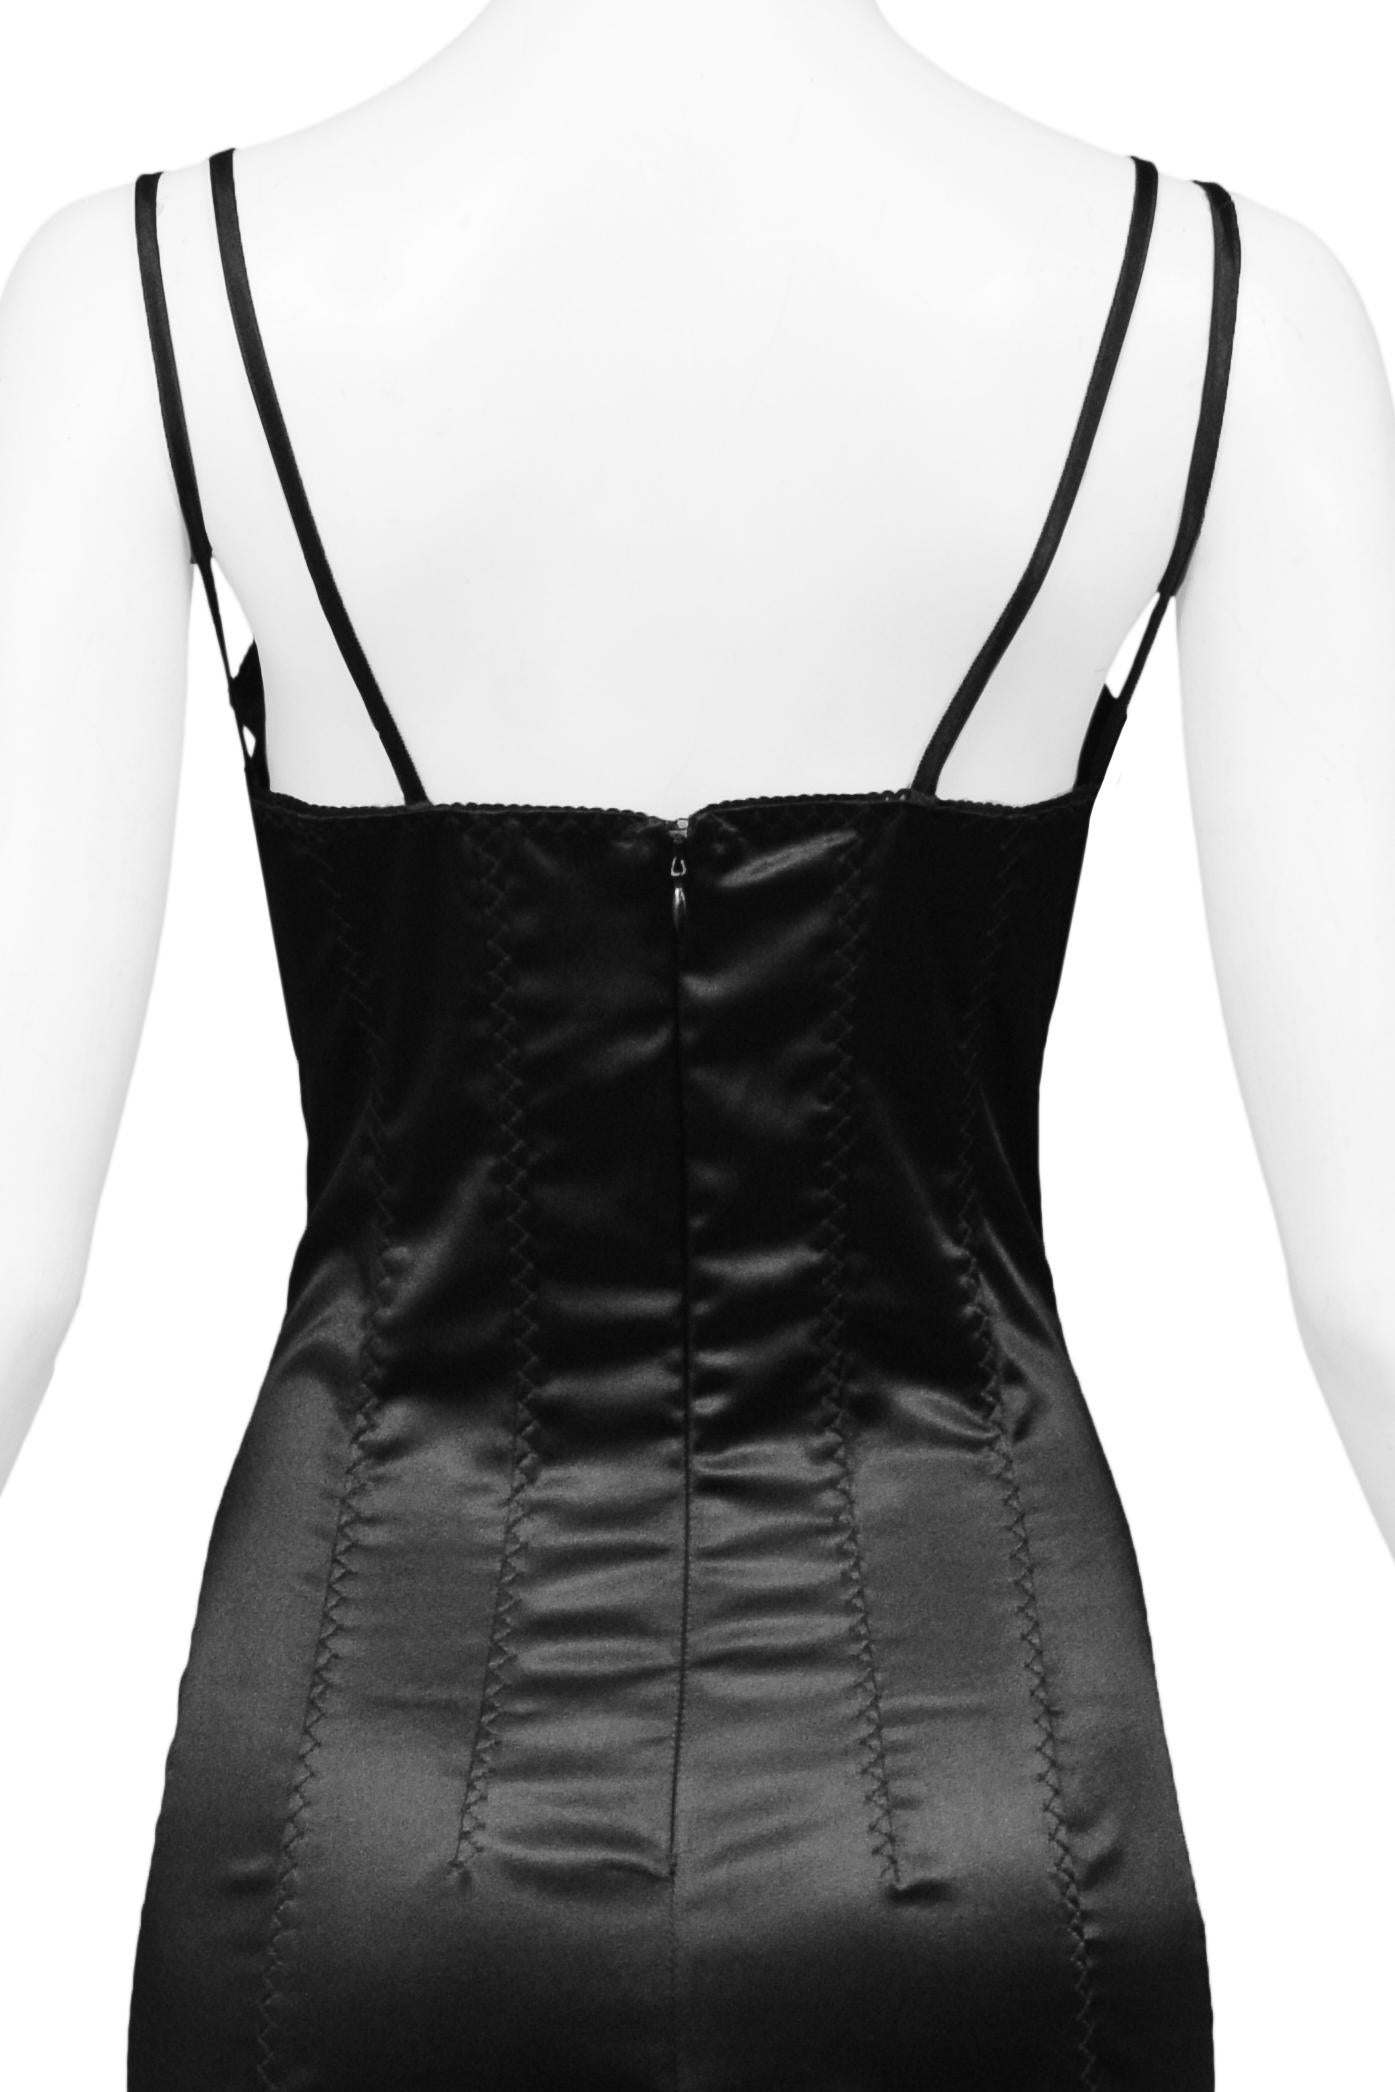 Dolce & Gabbana Black Satin Bodycon Dress with Lace Insets 1